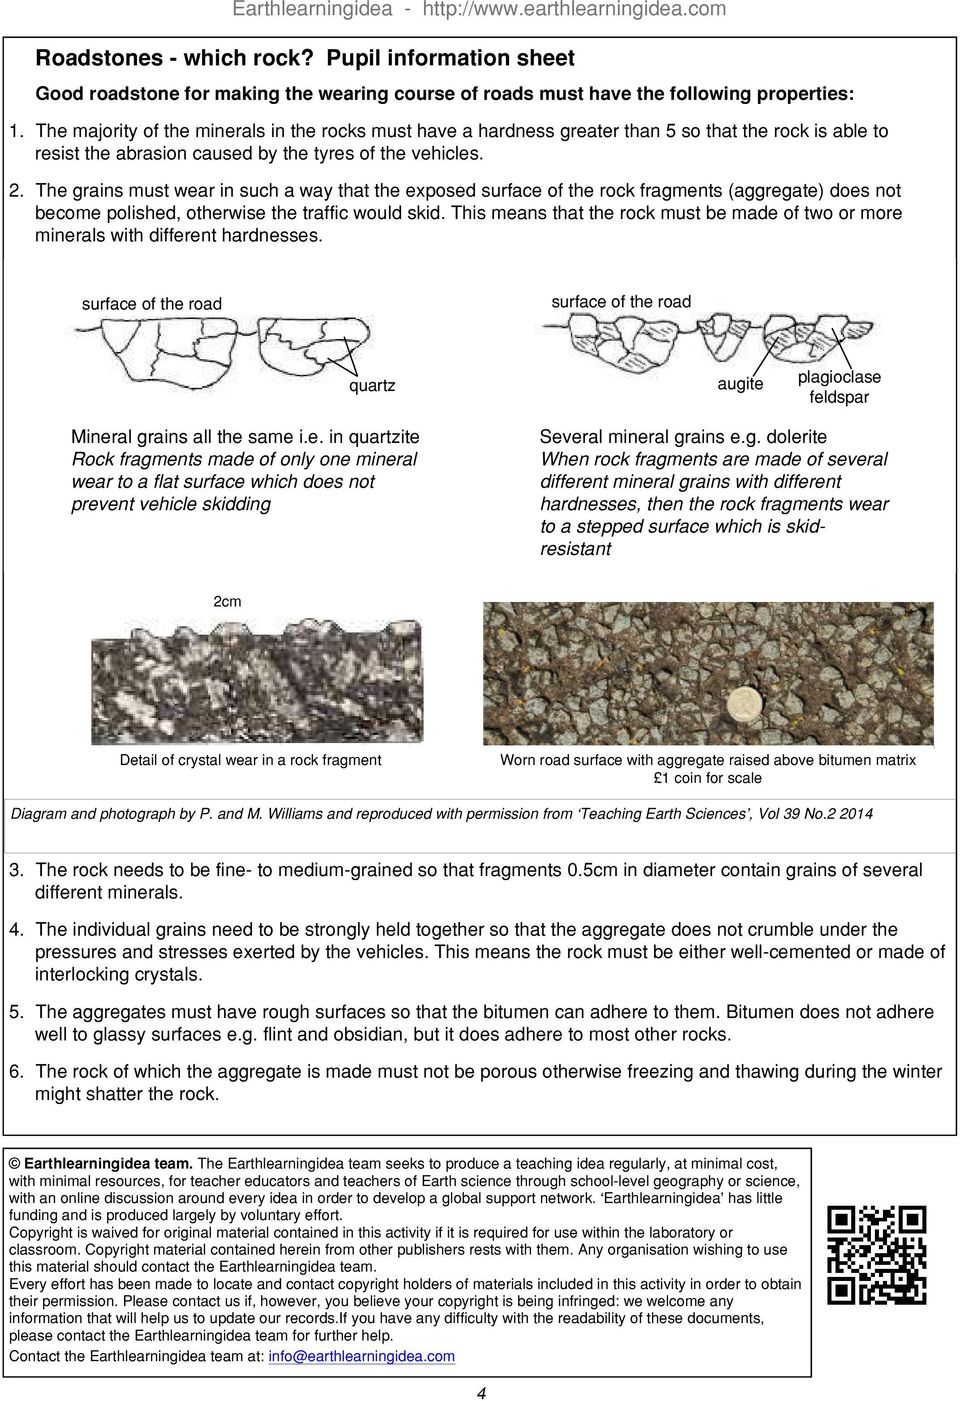 The grains must wear in such a way that the exposed surface of the rock fragments (aggregate) does not become polished, otherwise the traffic would skid.